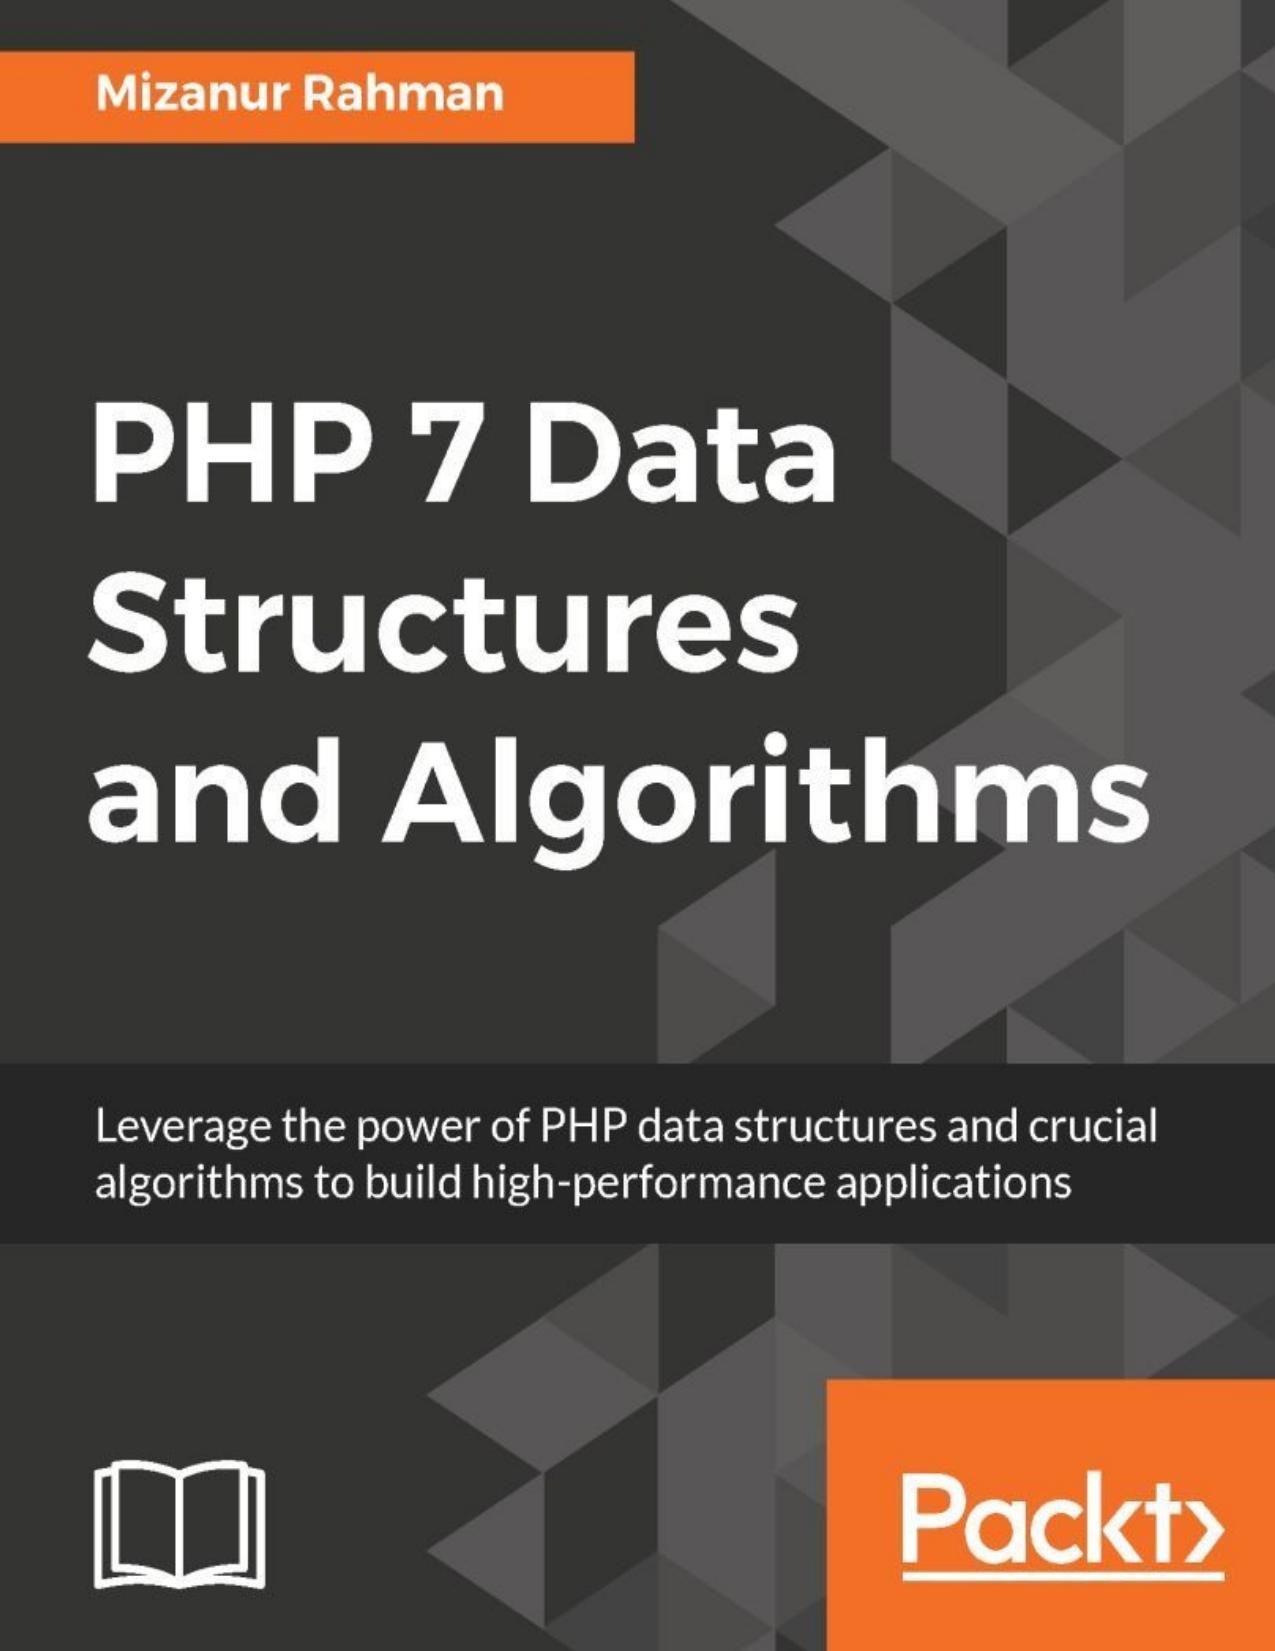 PHP 7 Data Structures and Algorithms by Mizanur Rahman